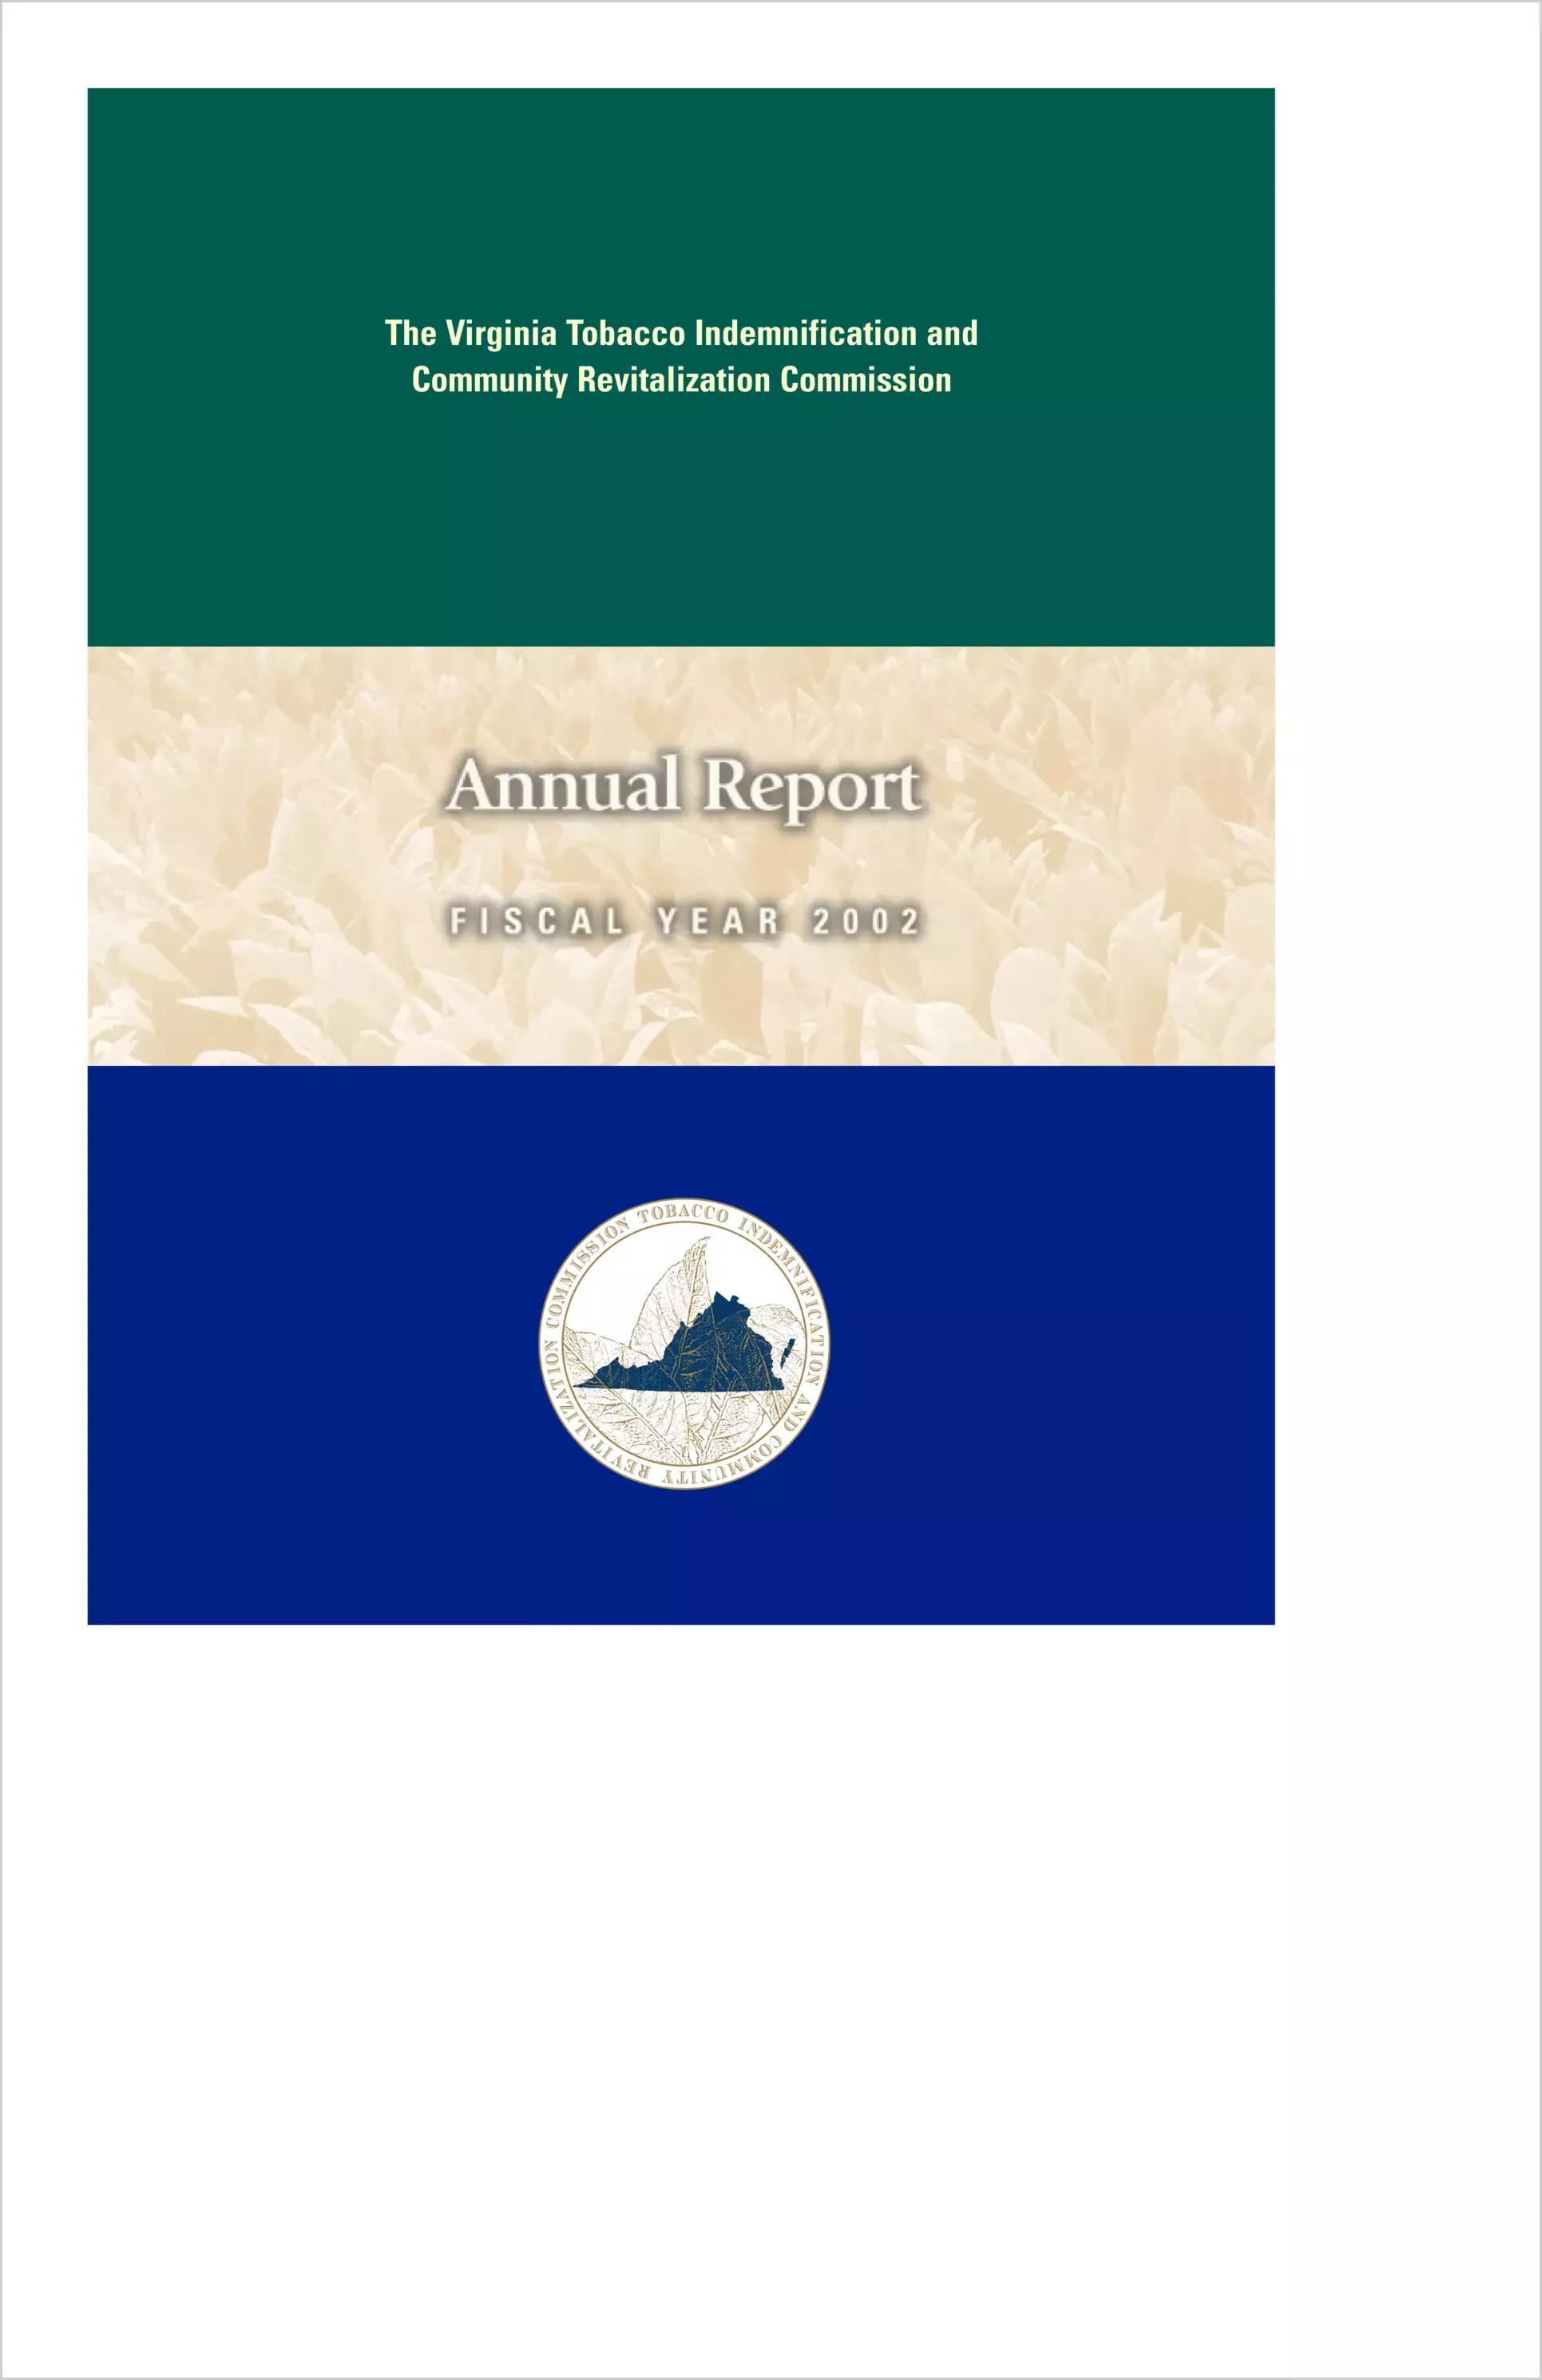 Virginia Tobacco Commission`s fiscal year 2002 annual report